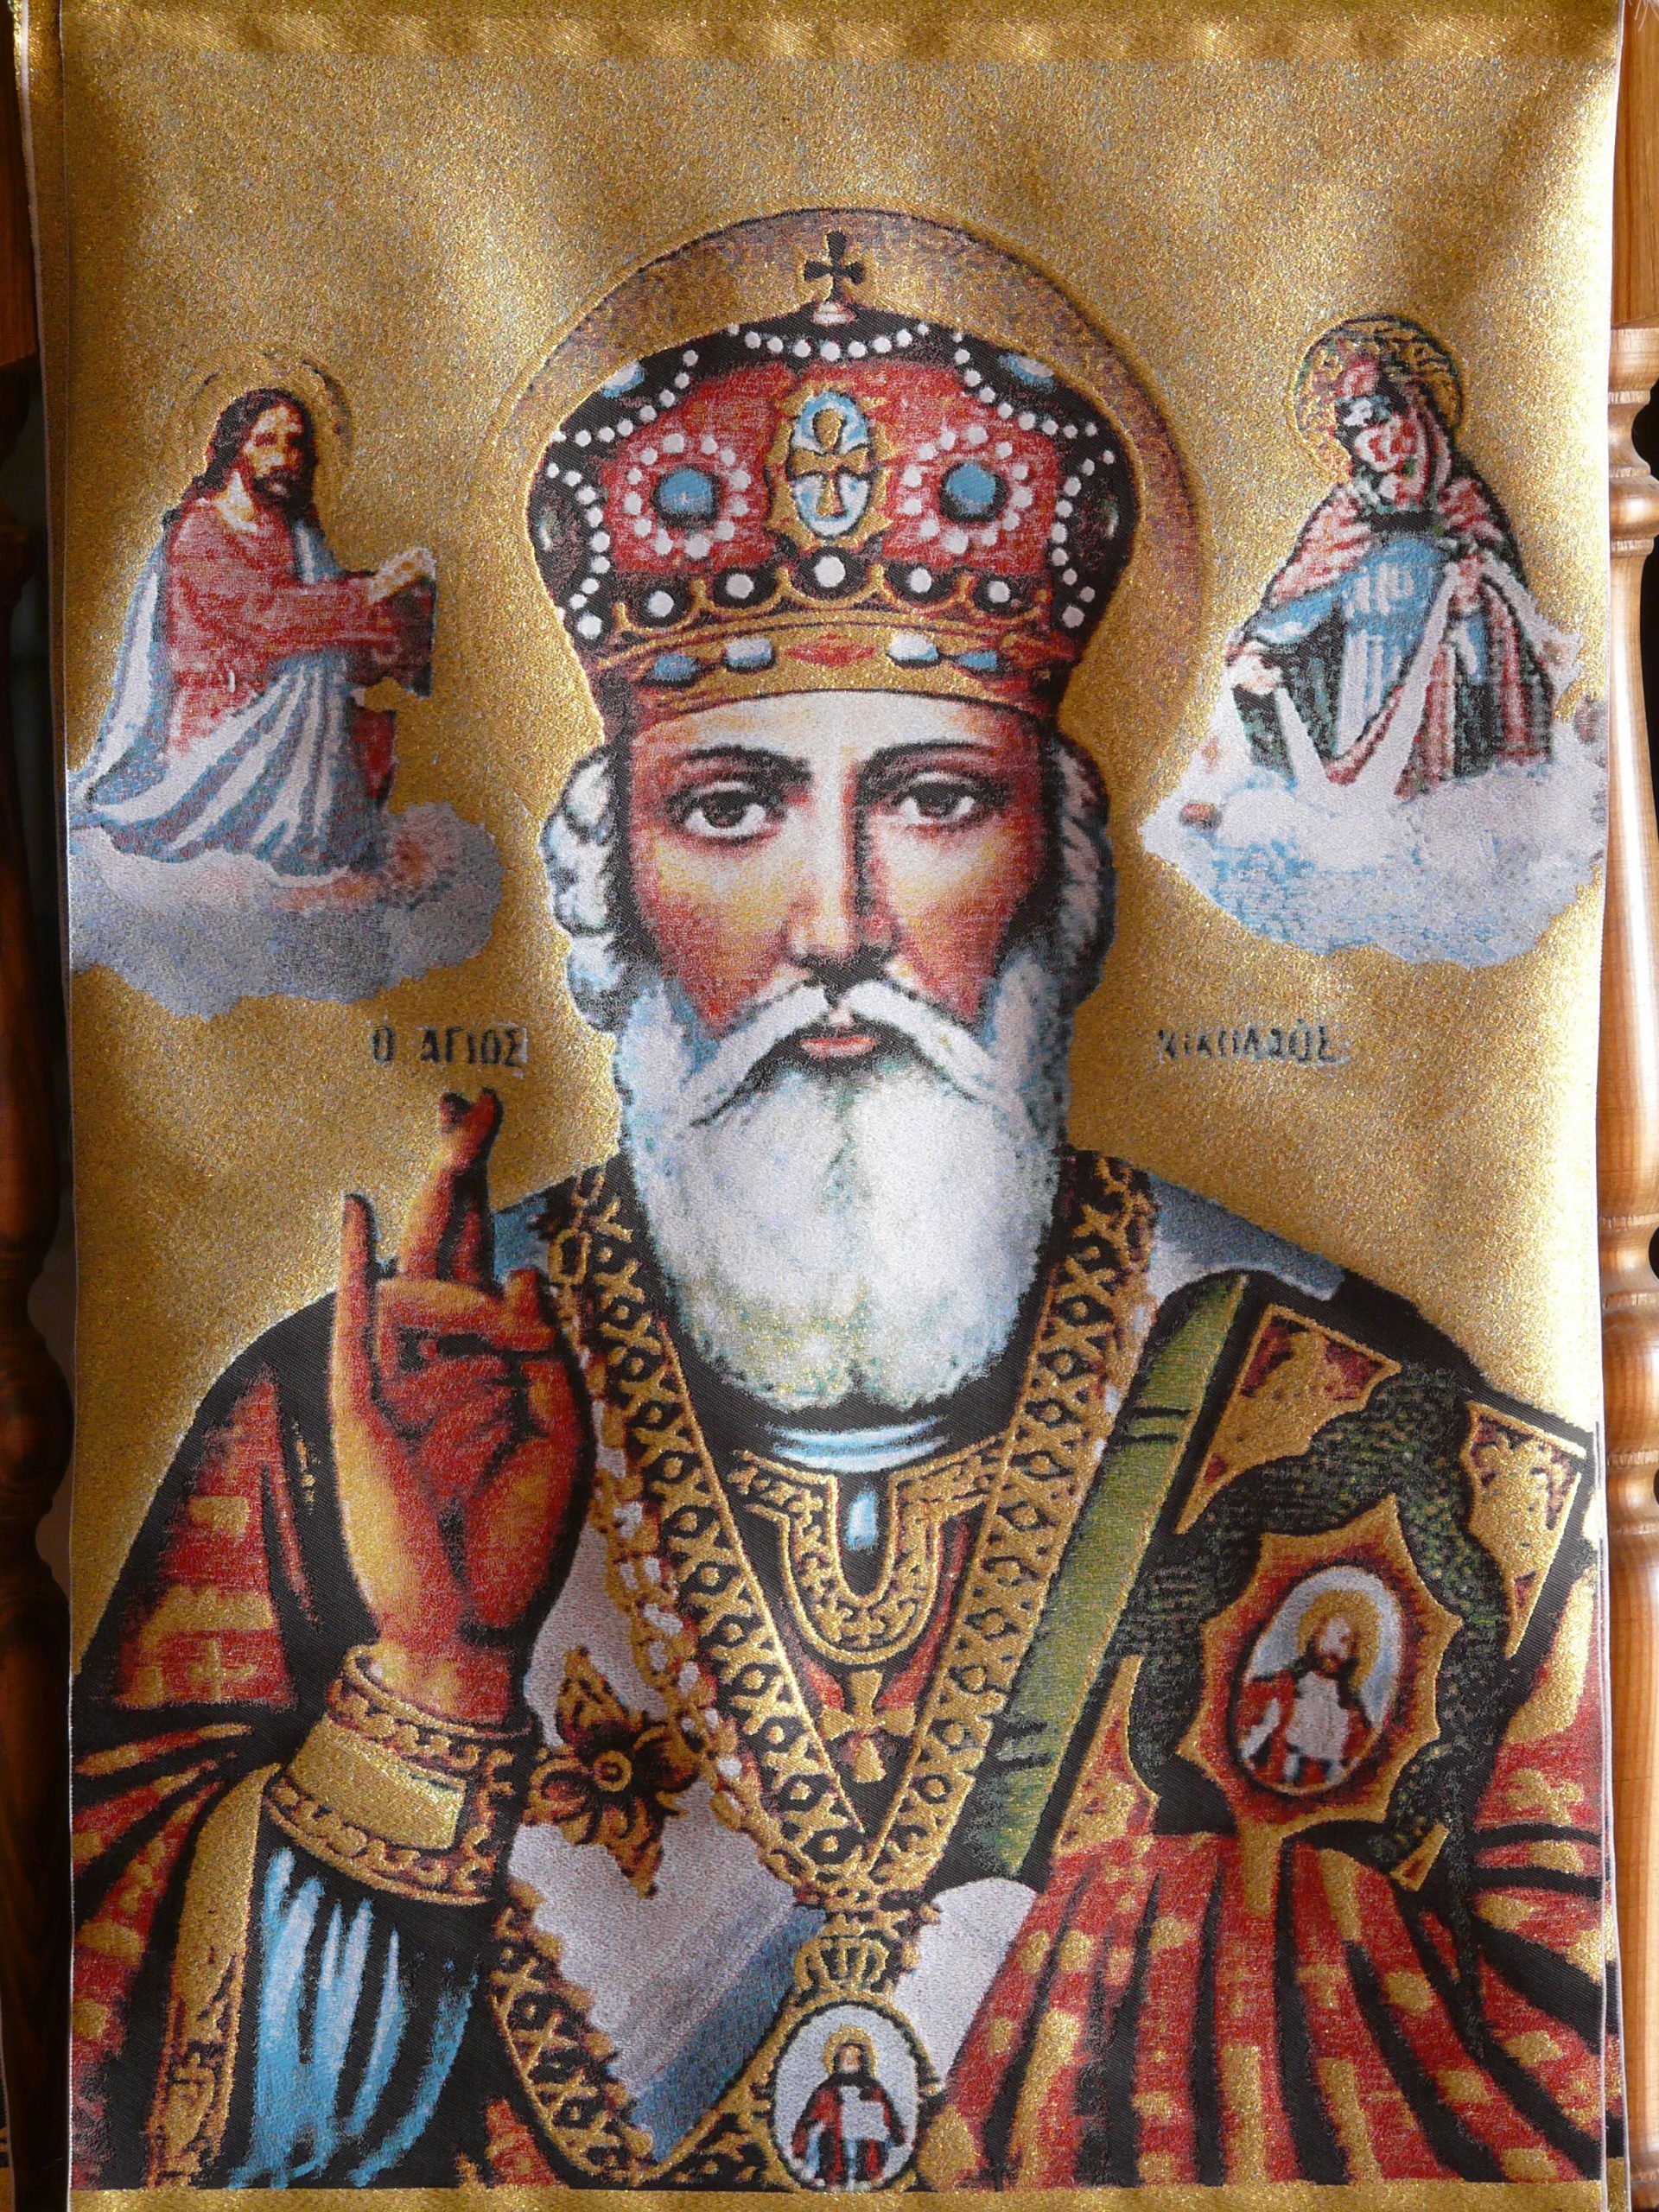 Legends tell of Saint Nicholas's acts of charity